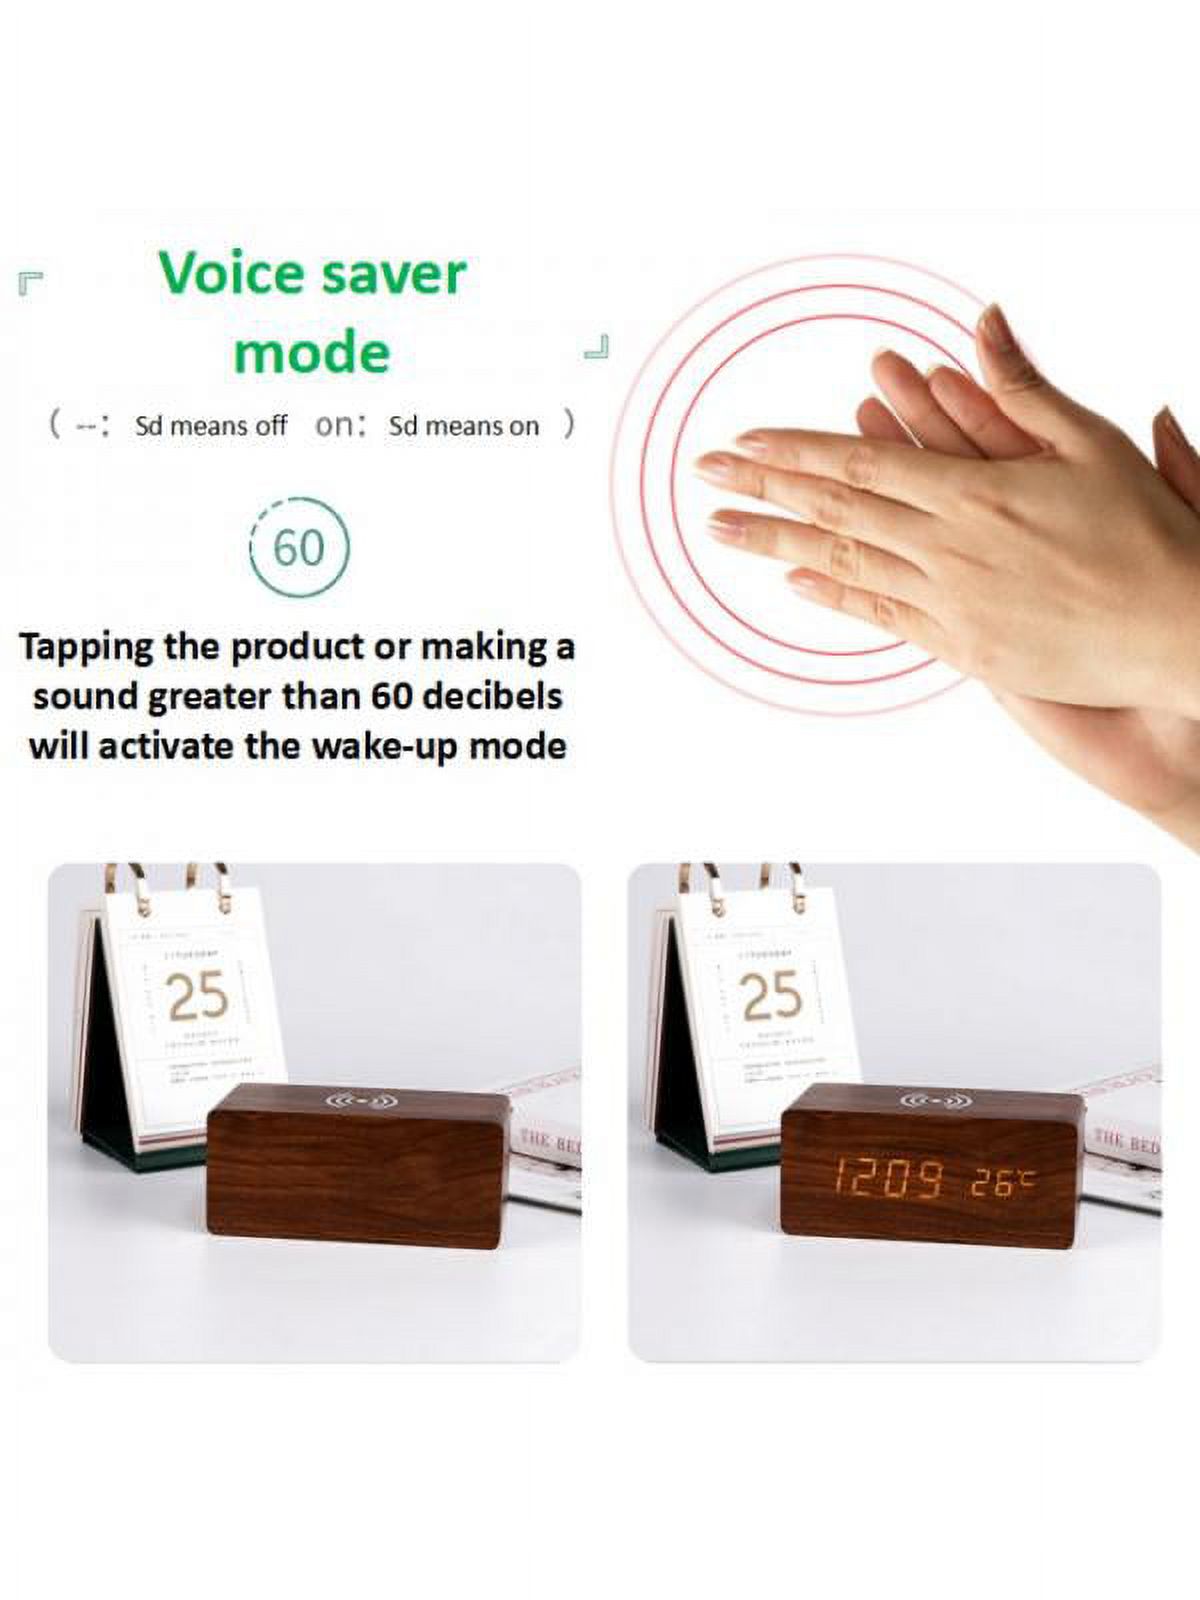 Dragonus Modern Wooden Electric Digital LED Desk Alarm Clock Thermometer Wireless Charger - image 3 of 4